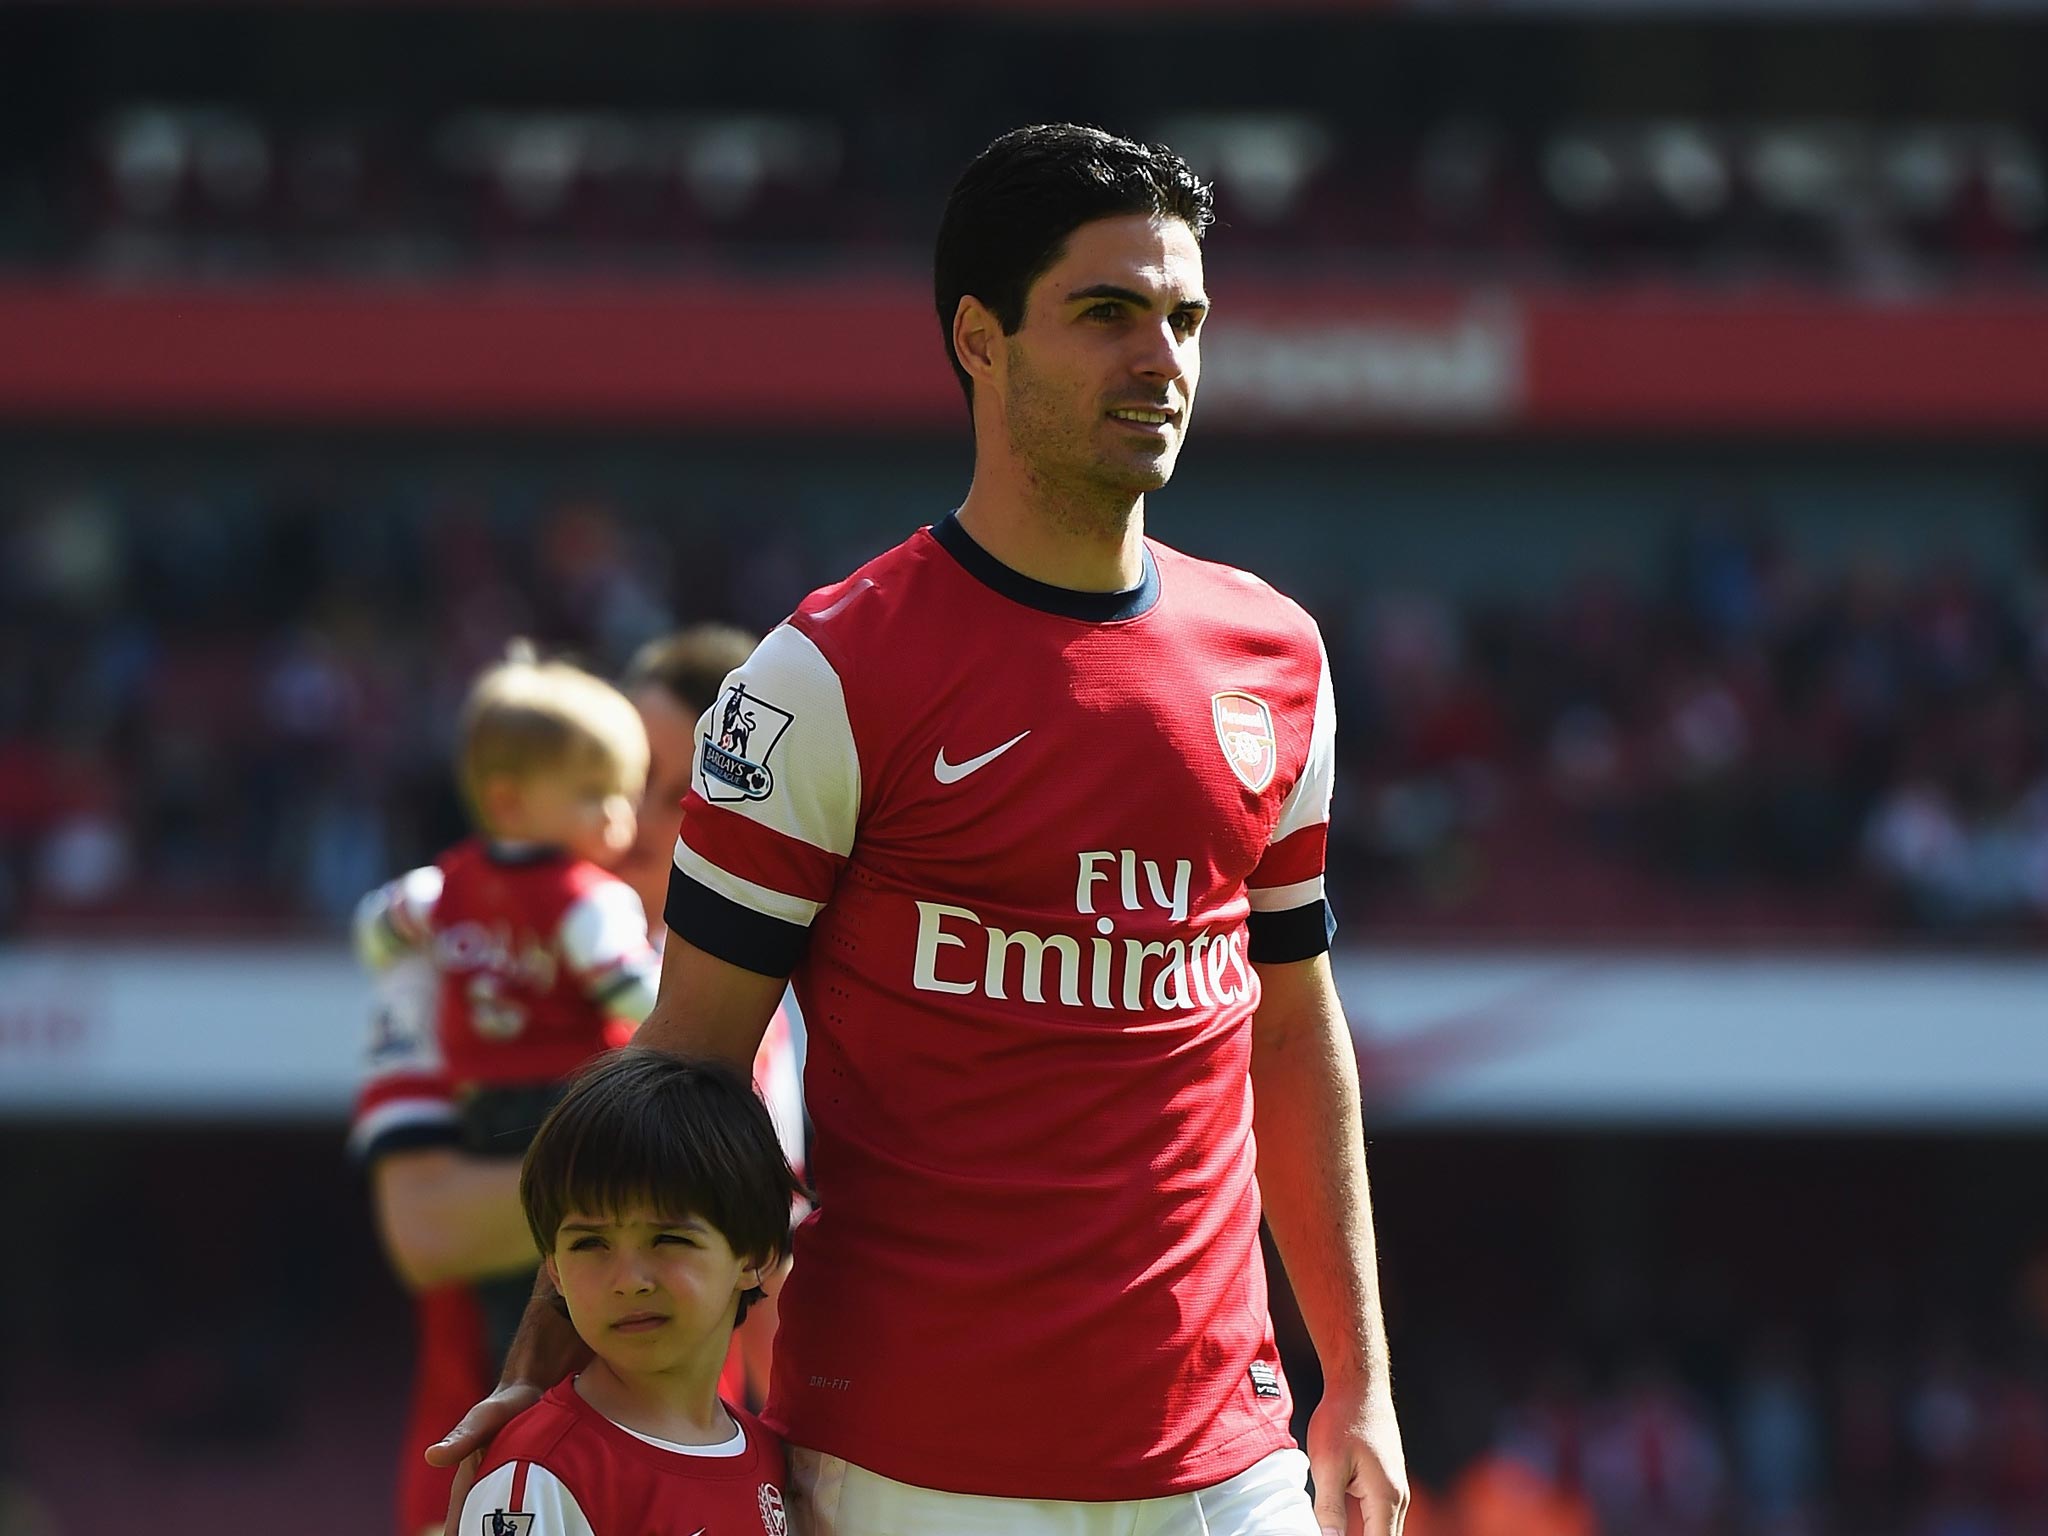 ‘I don’t like it when someone criticises my club,’ says Mikel Arteta, ‘I have a different opinion’